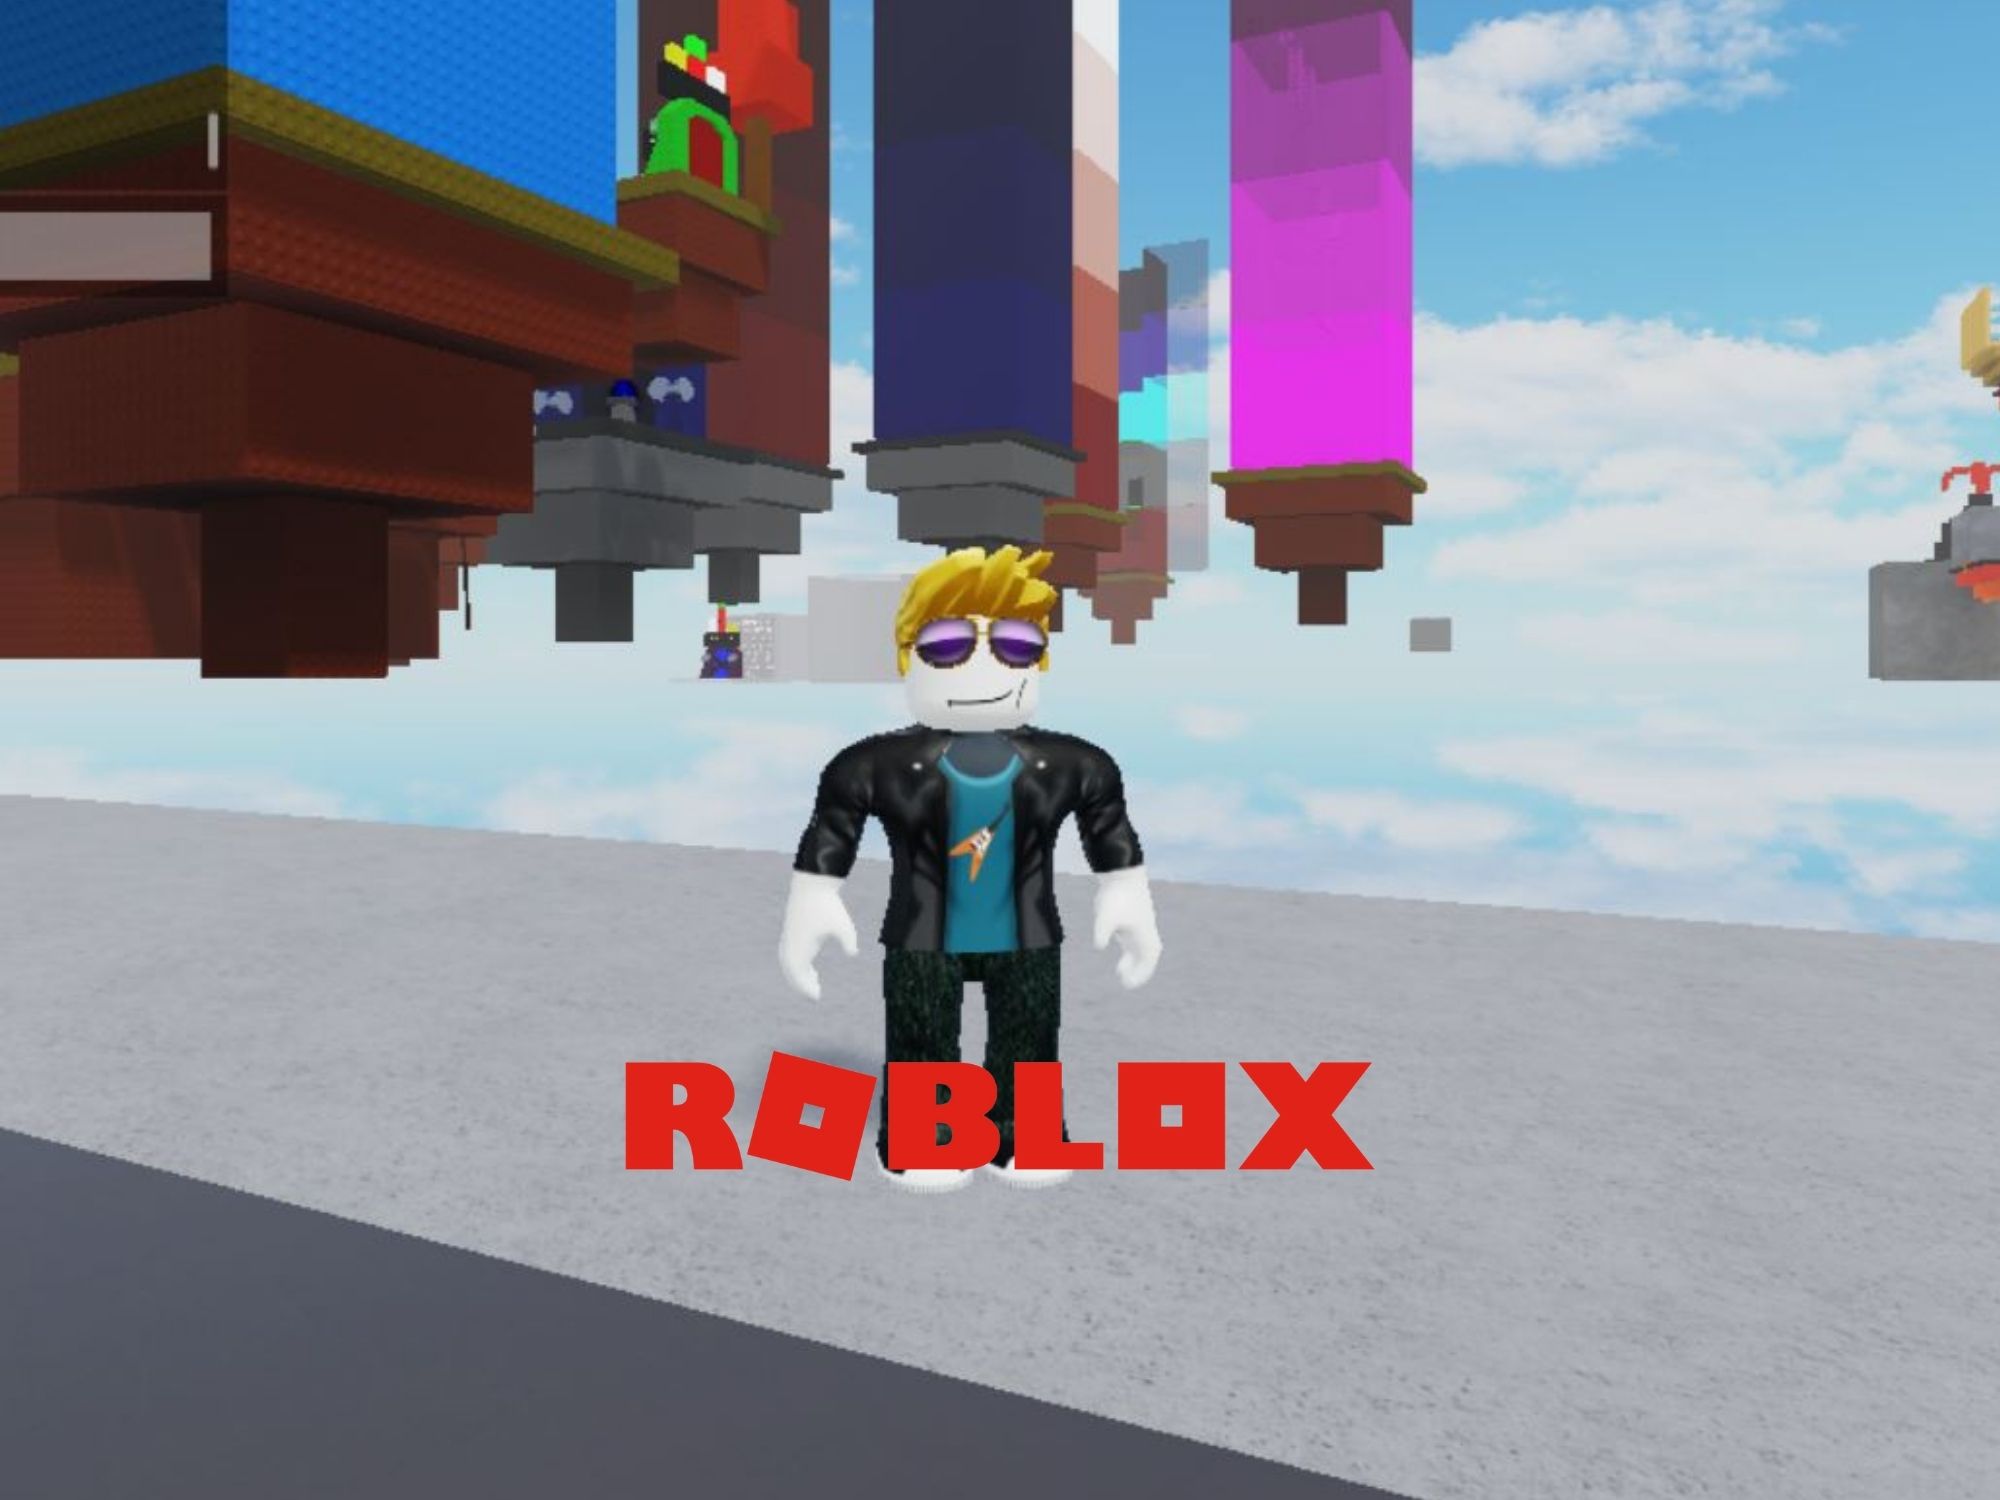 Roblox Game Designer Build Your Own Obby Virtual Program Built By Me Stem Learning - roblox obby image